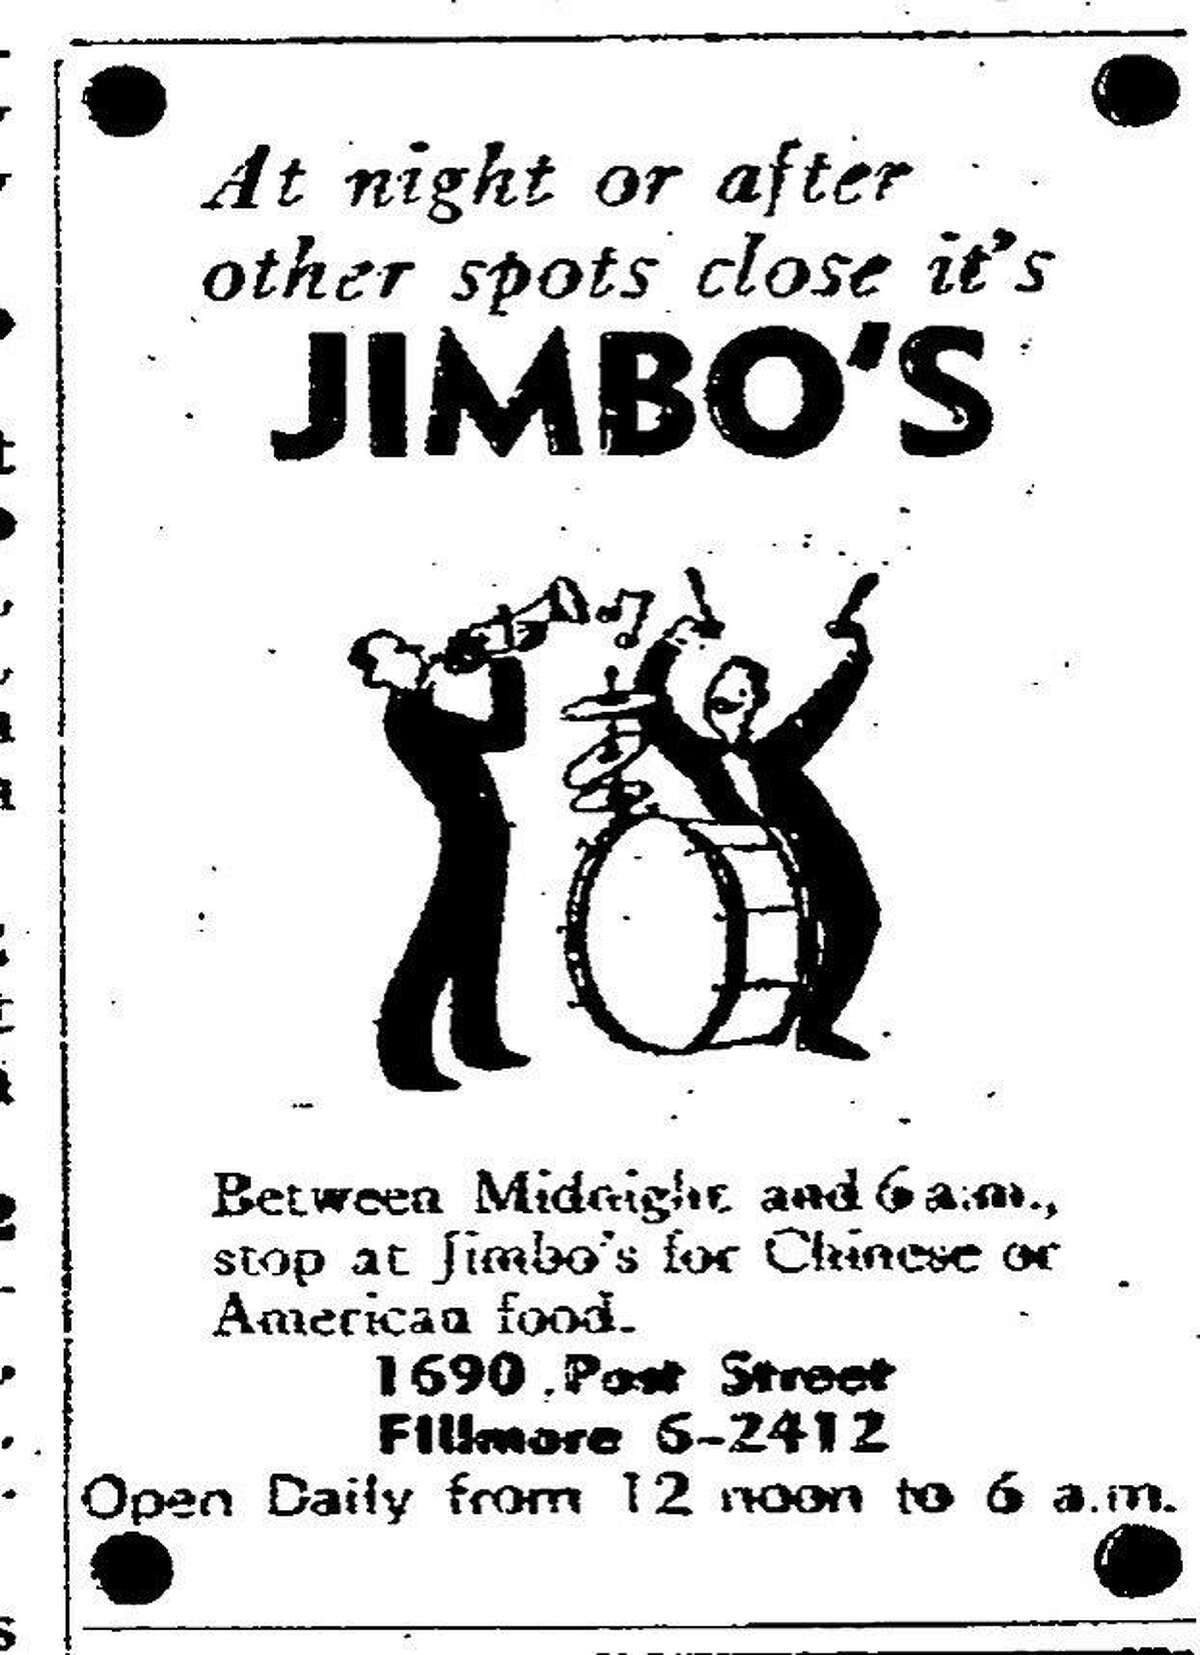 A May 17, 1954 Chronicle ad for Jimbo's Bop City, a popular jazz club that closed in 1965 located at 1690 Post St.,